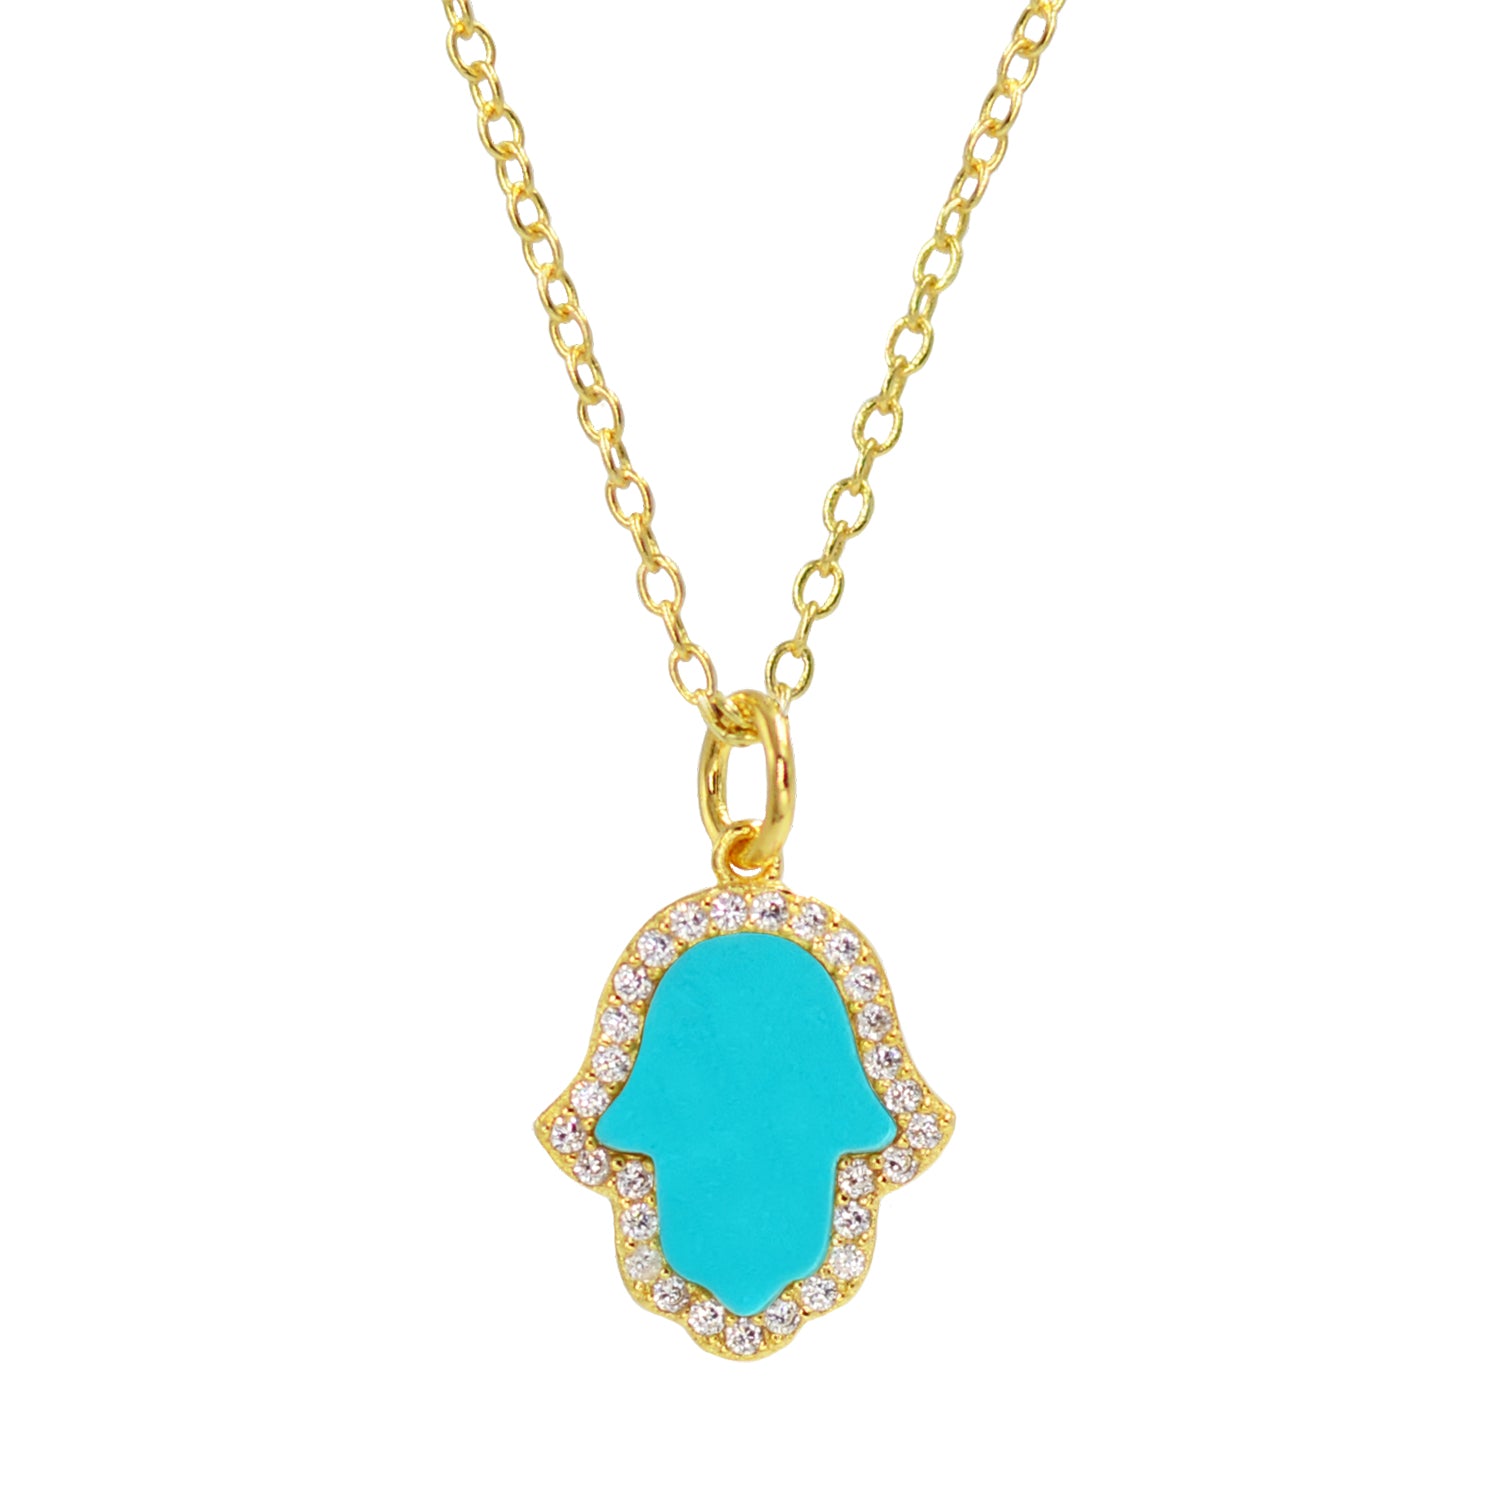 Hamsa Hand Necklace in Turquoise